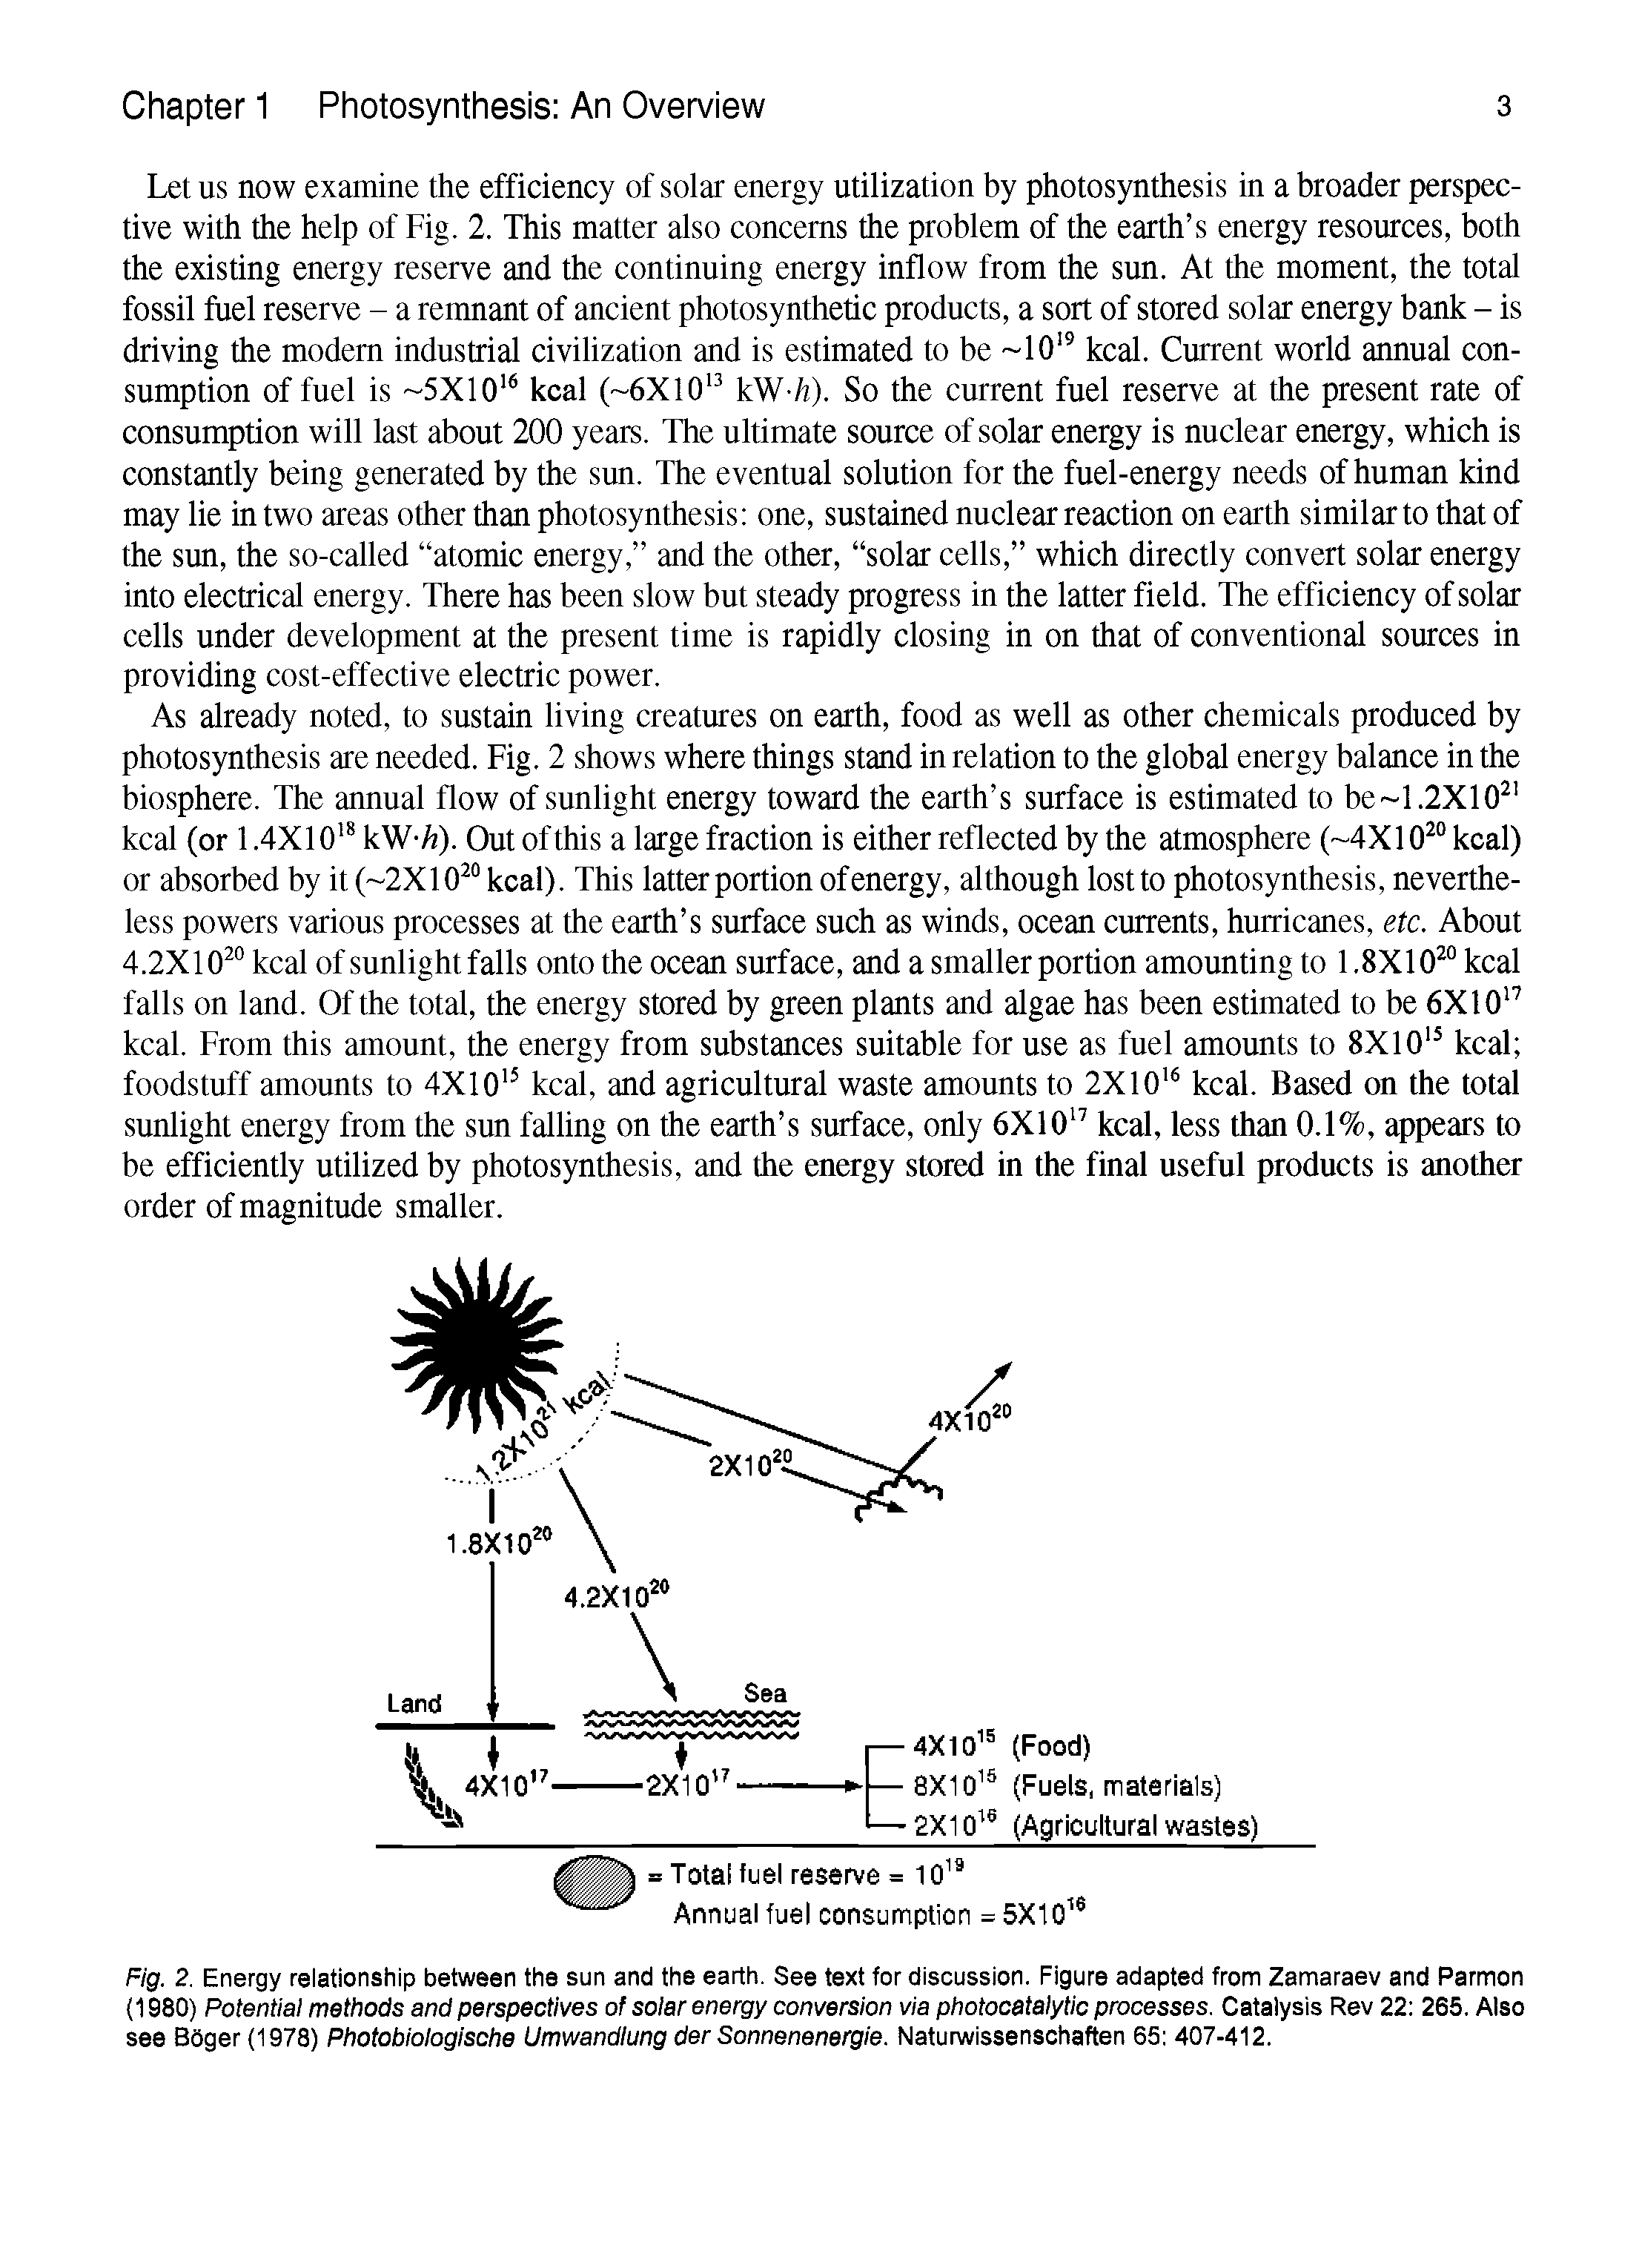 Fig. 2. Energy relationship between the sun and the earth. See text for discussion. Figure adapted from Zamaraev and Parmon (1980) Potential methods and perspectives of solar energy conversion via photocatalytic processes. Catalysis Rev 22 265. Also see BOger (1978) Photobiologische Umwandlung der Sonnenenergie. Naturwissenschaften 65 407-412.